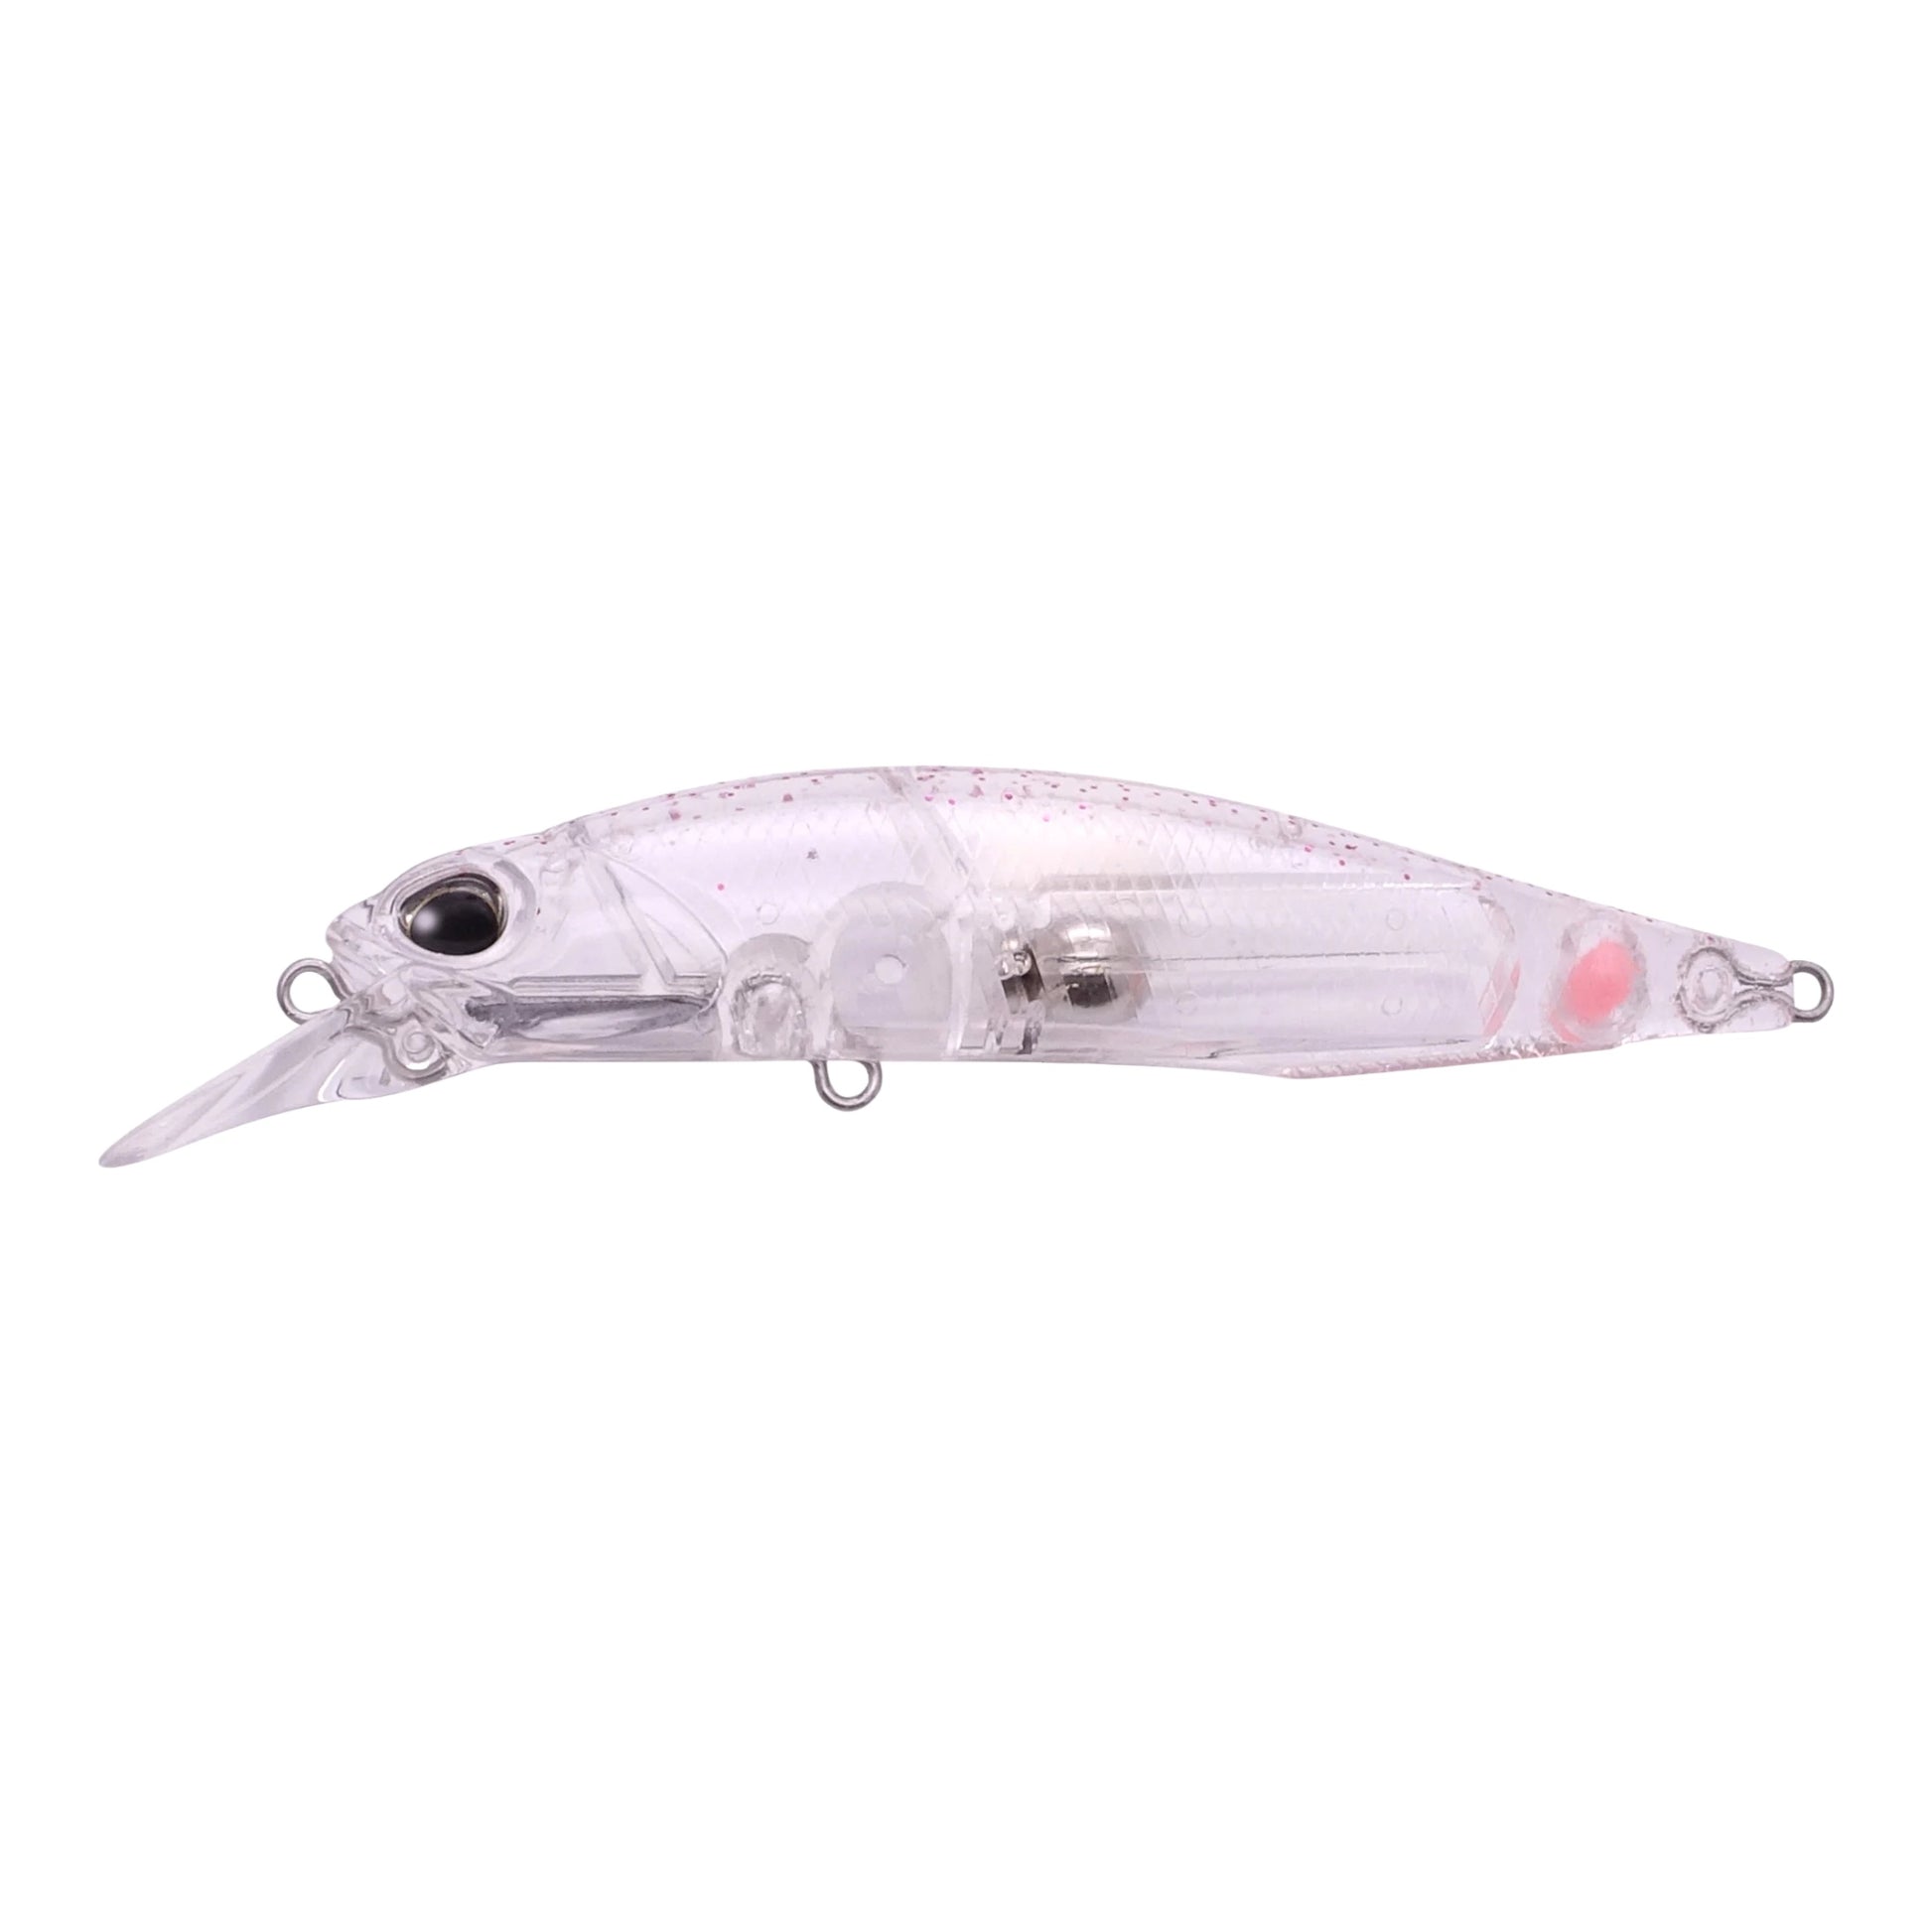 Realis Rozante 63SP Jerkbait Suspending 63mm 5g Minnow Fishing Lures for  Bass 9063